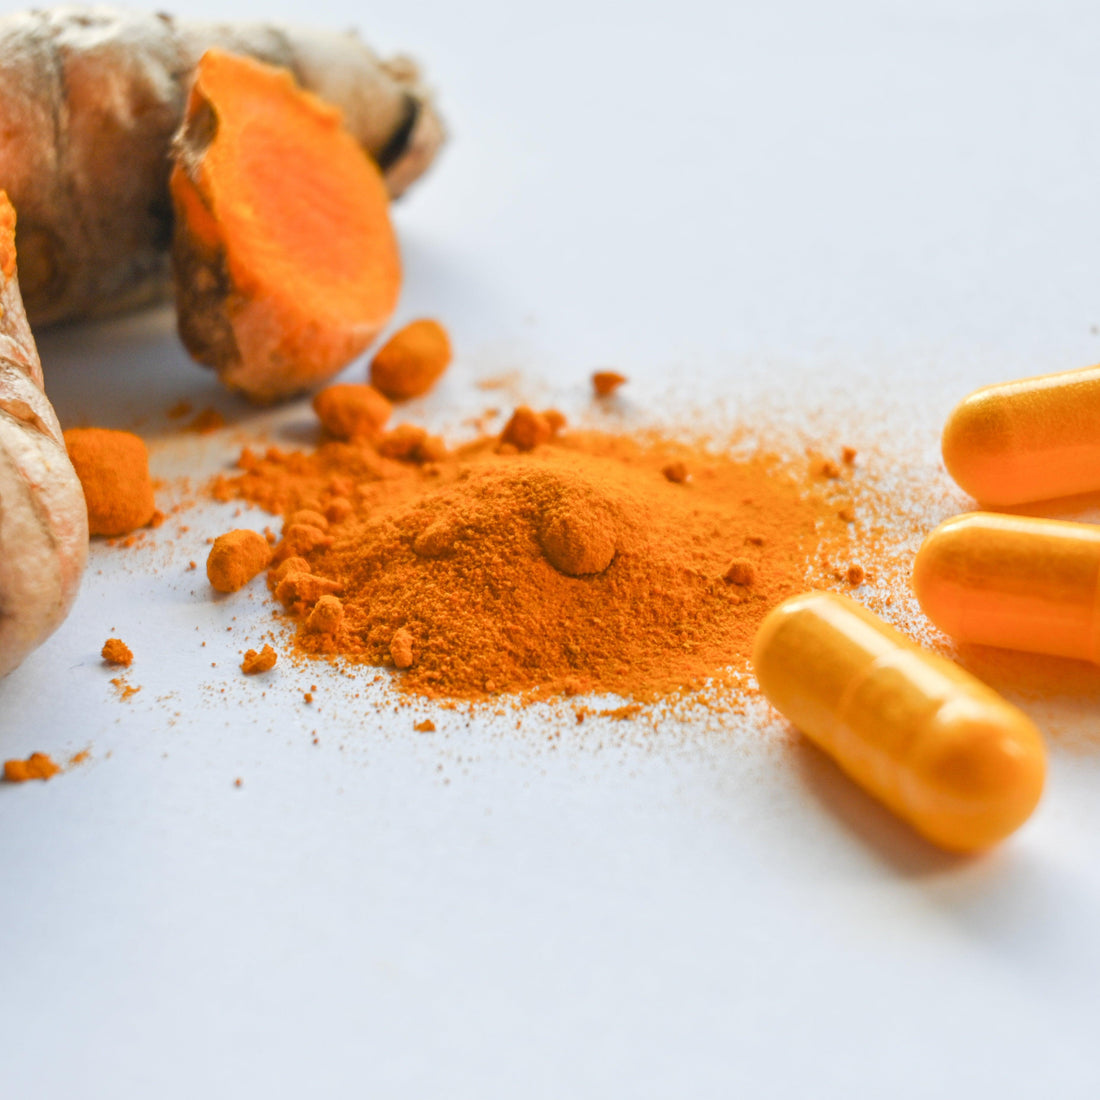 How to best absorb the benefits of Turmeric - Green Trading